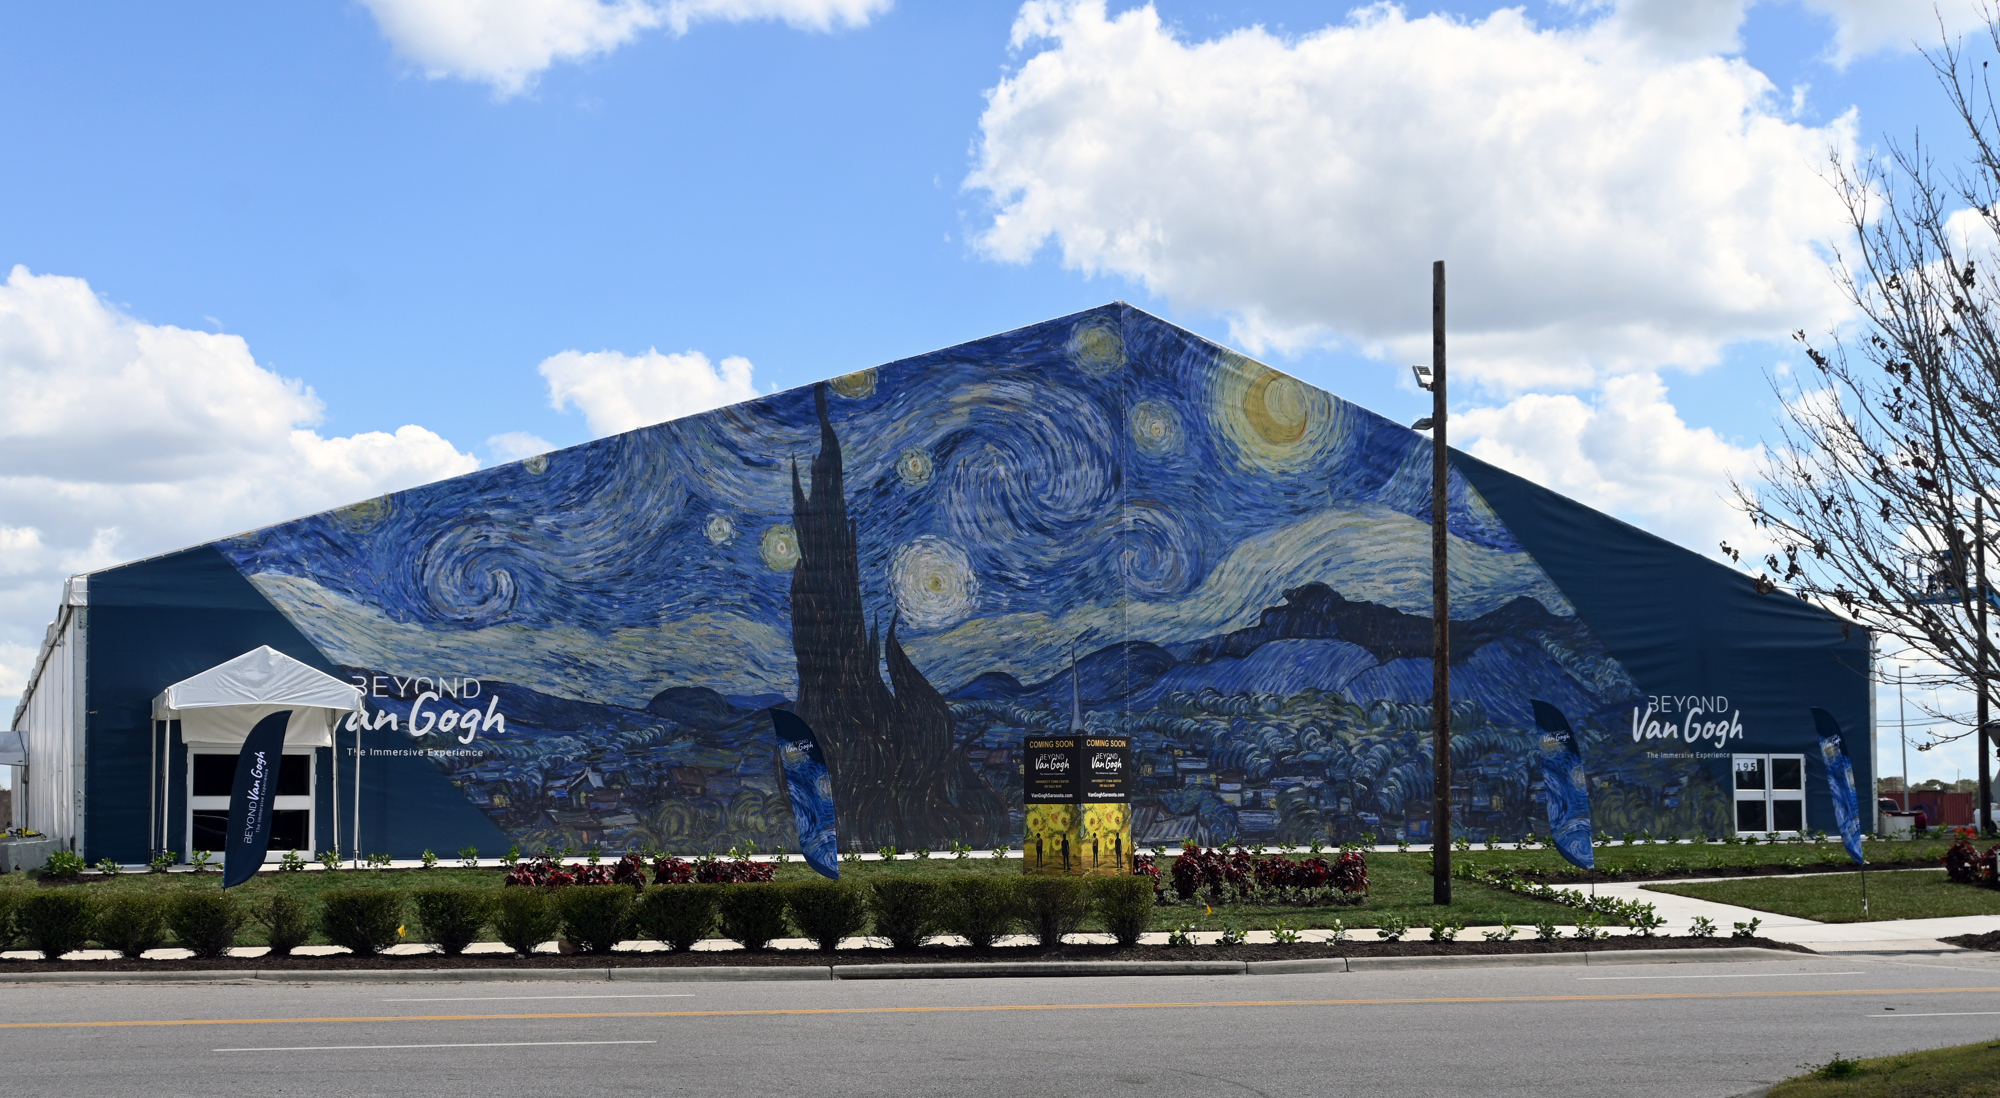 Van Gogh's famous masterwork Starry Night is displayed on the outside of the exhibit. (Photo: Spencer Fordin)